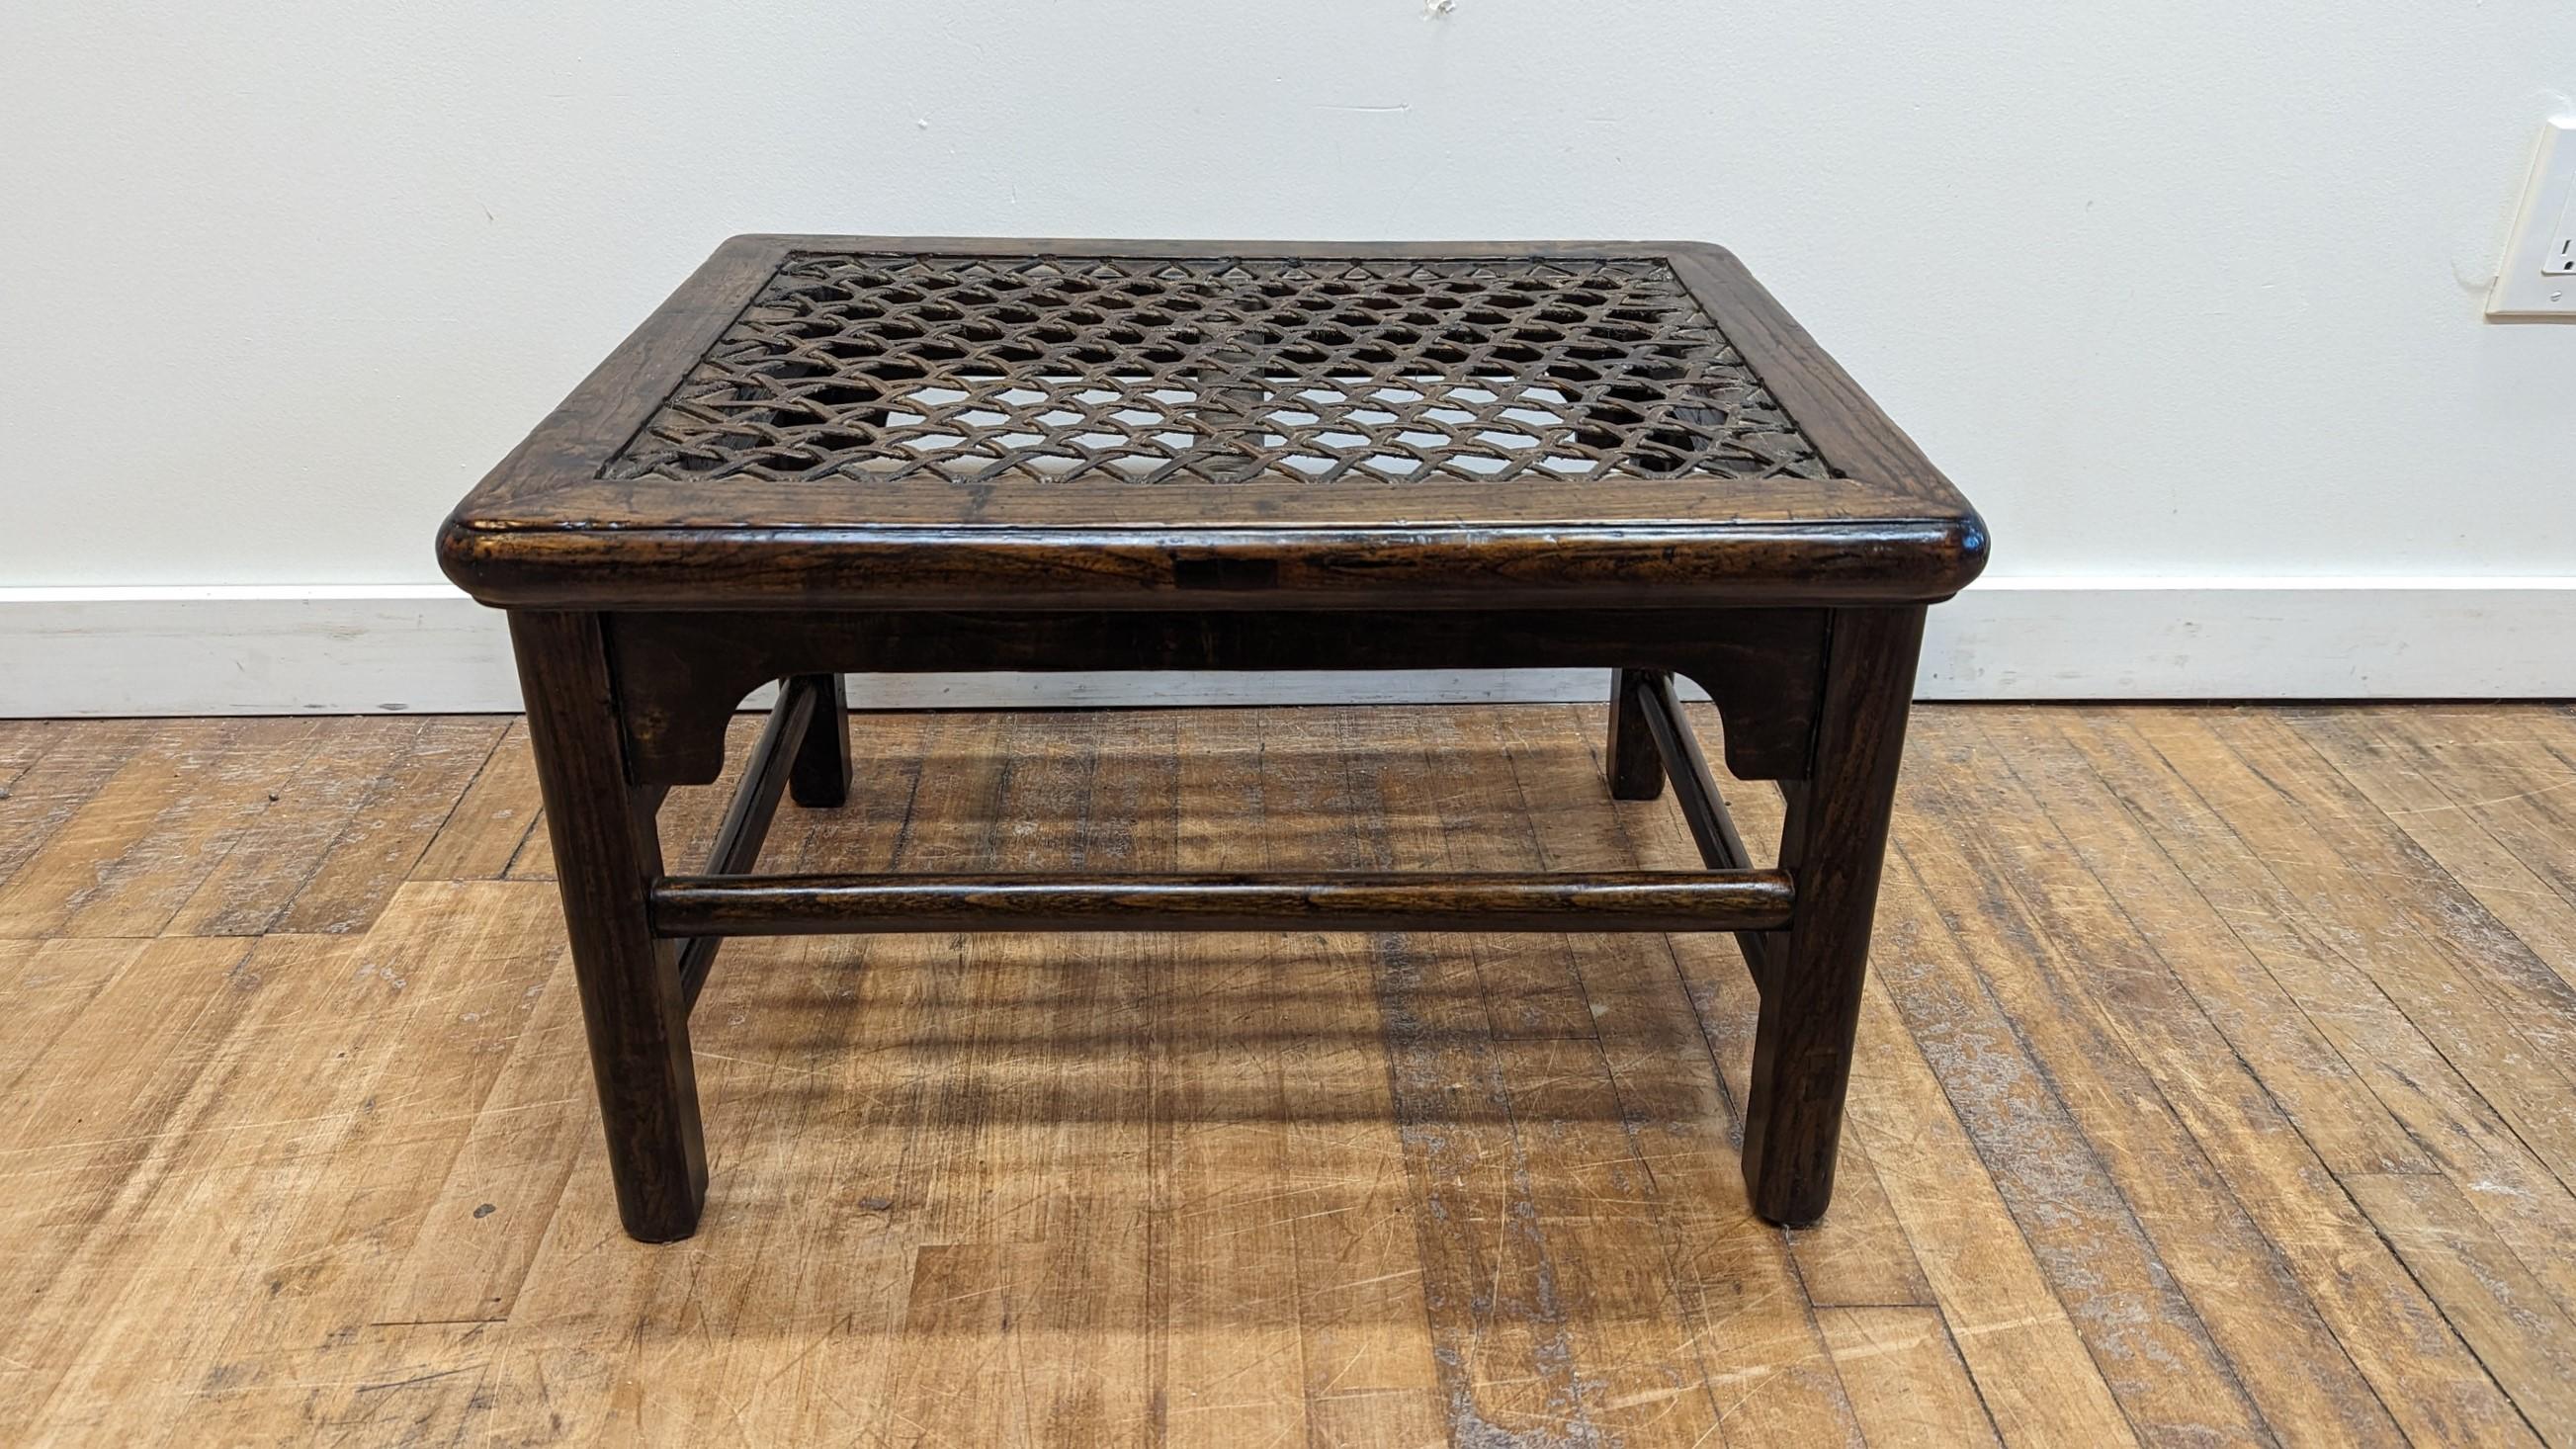 A 19th century Elm Wood Hide Woven Seat Stool.  The top of this stool is woven with incredible detail creating a pattern of stars.  The hide is cut into thick strands, incredibly strong and solid.  Woven to the recessed inset center of  the frame. 